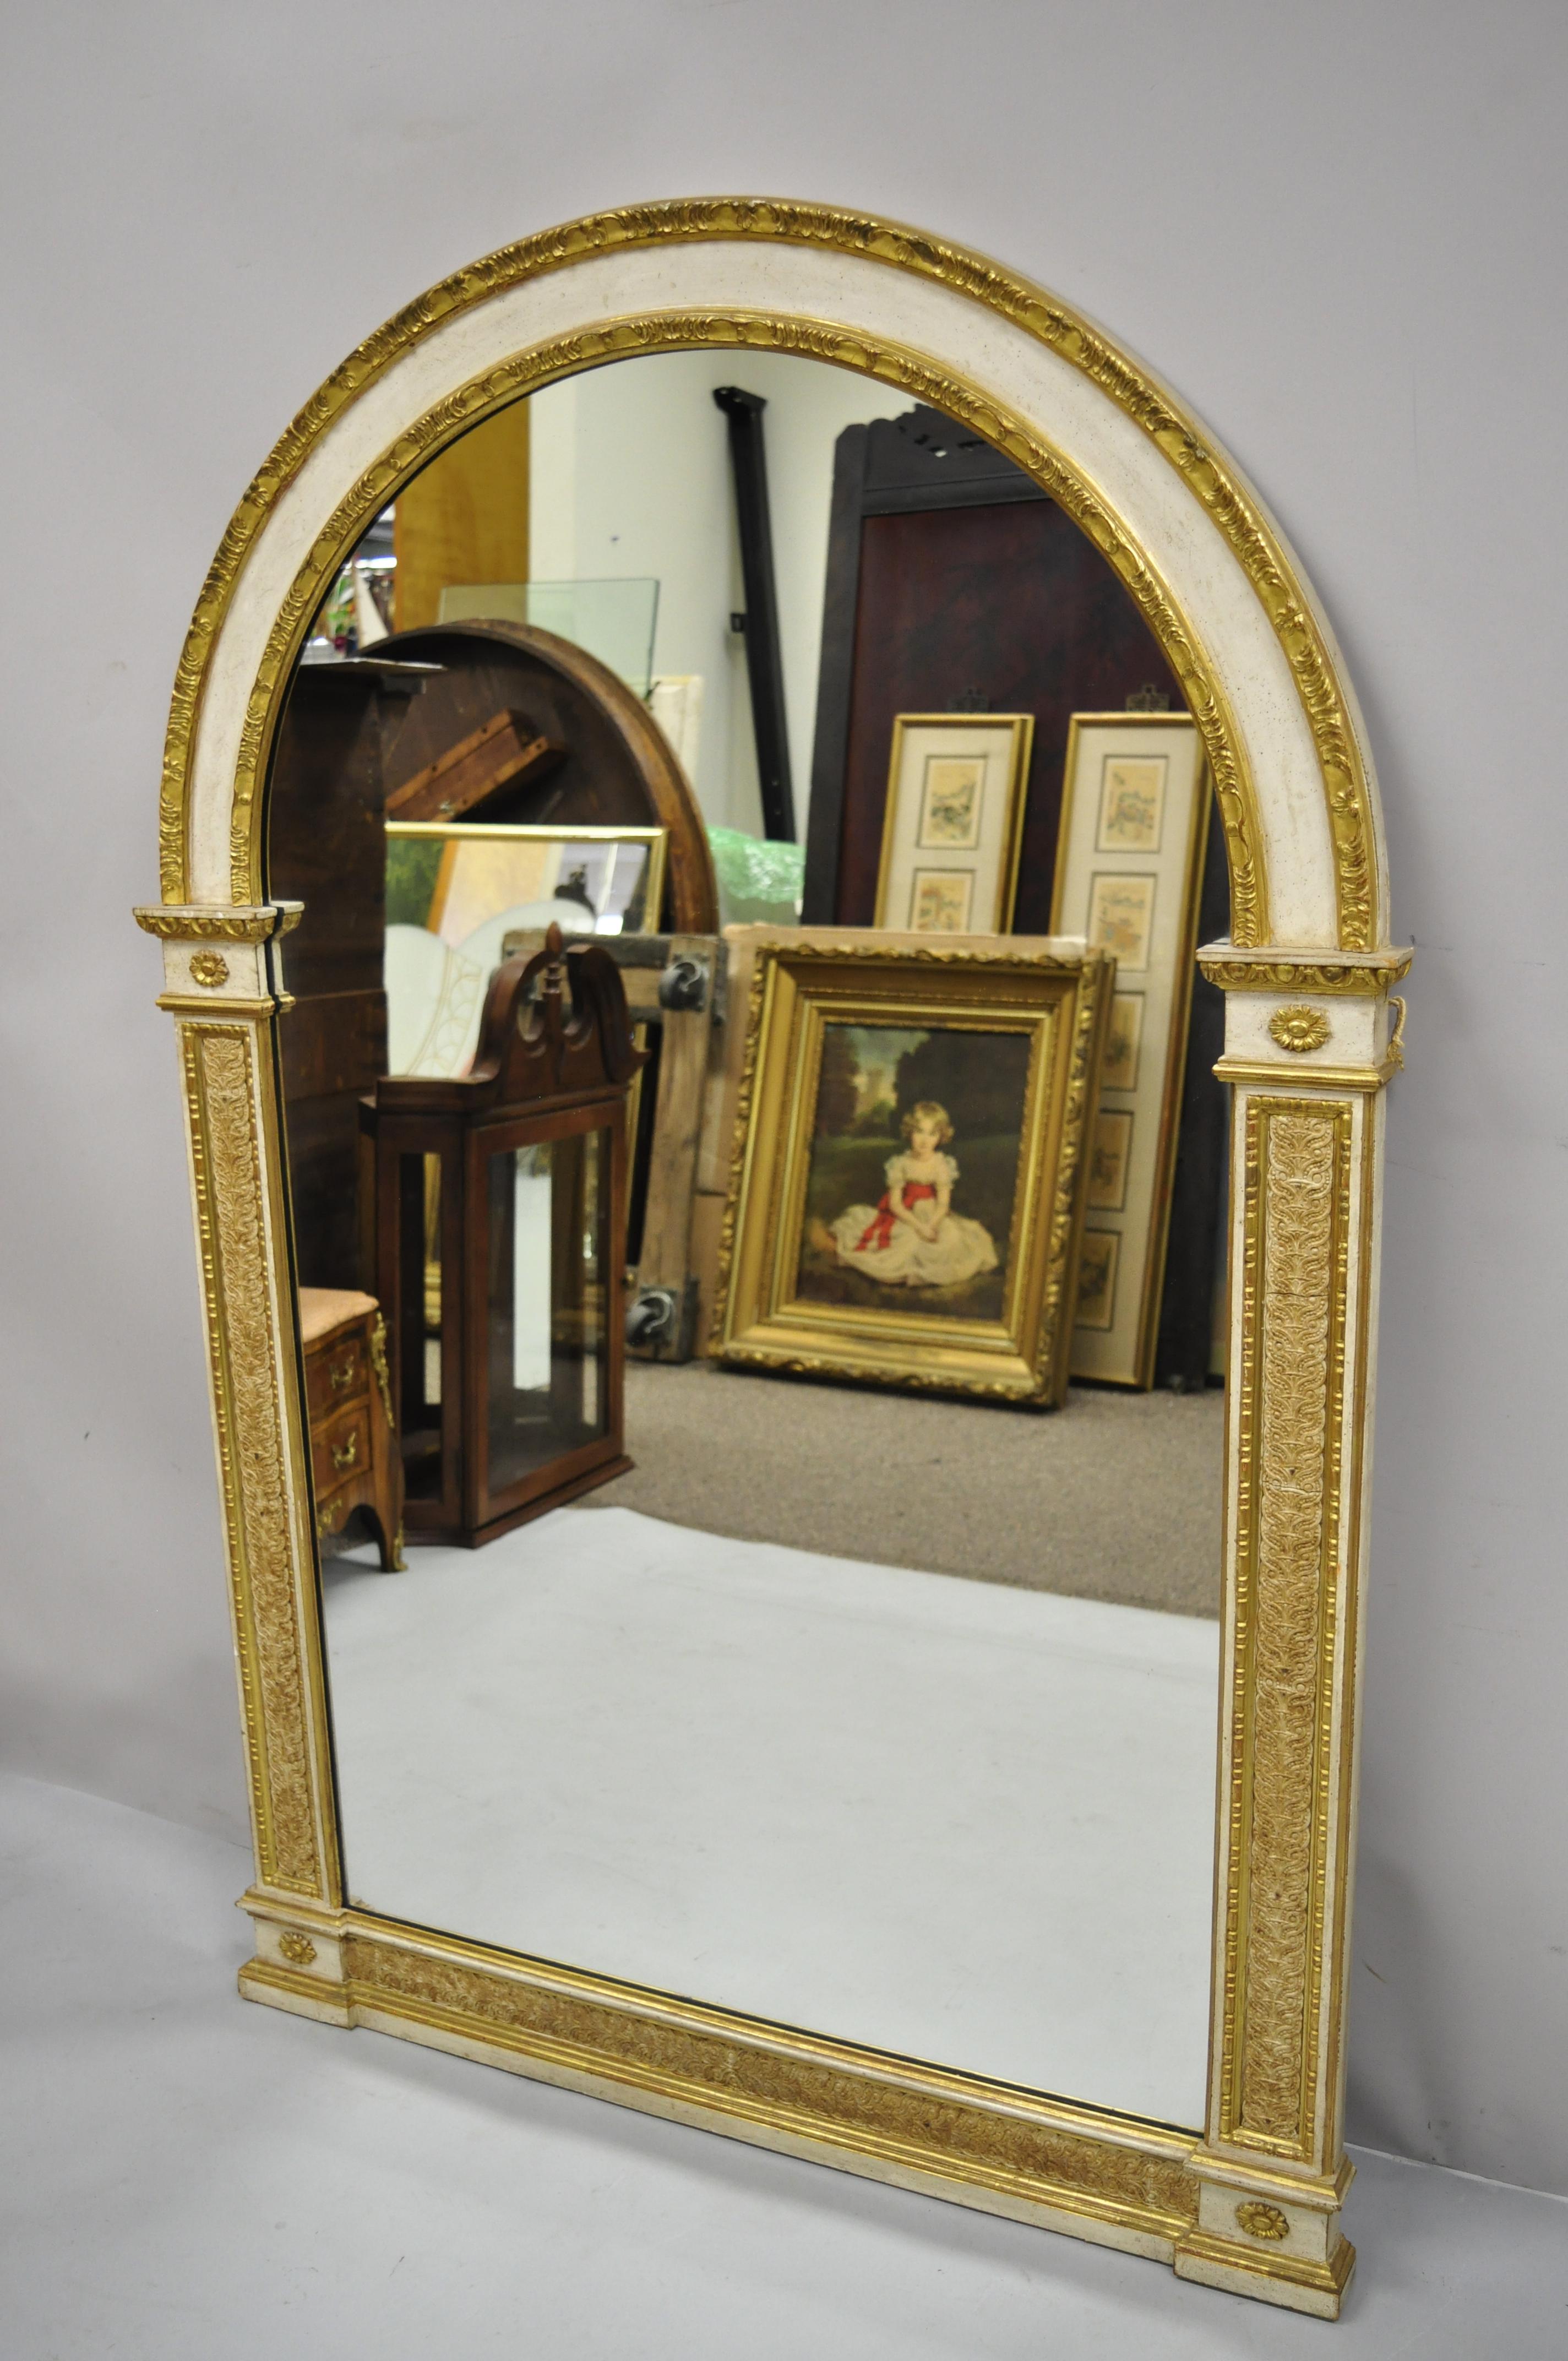 Antique Italian neoclassical carved gold gilt arched top large trumeau console mirror. Item features arched top, nice larger size, solid wood frame, gold gilt distressed finish, nicely carved details, quality Italian craftsmanship. Circa mid 20th